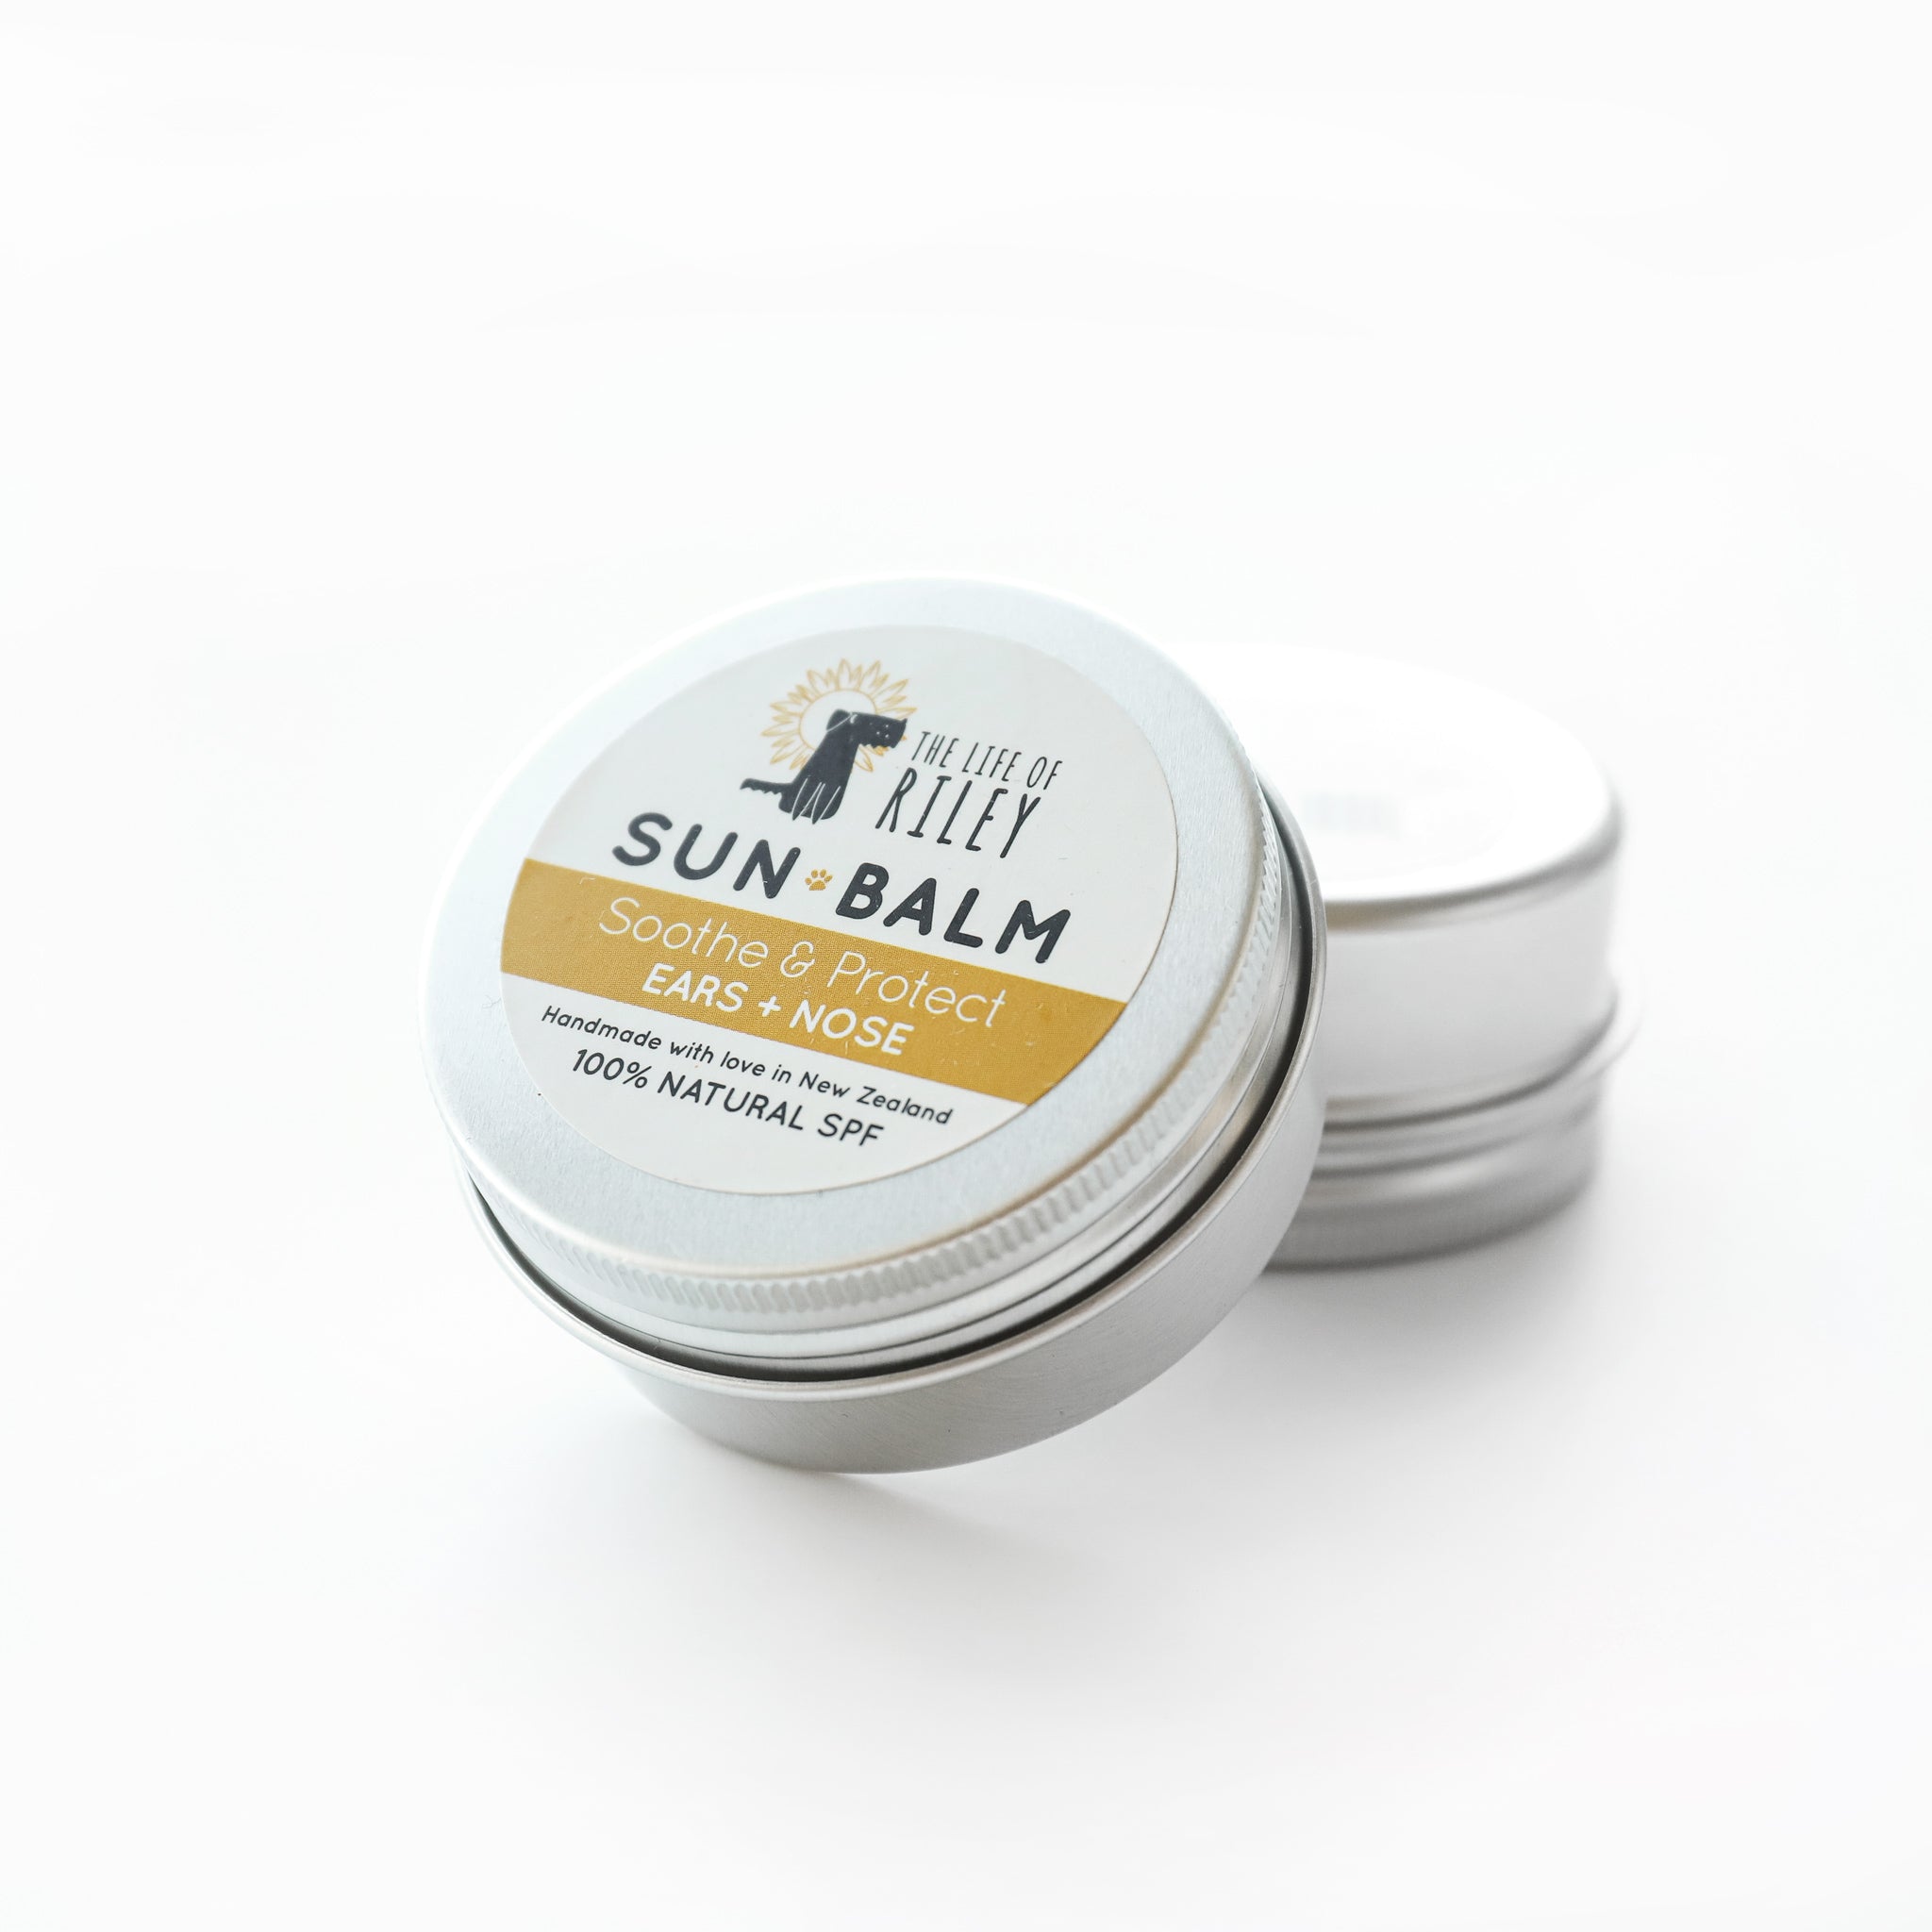 Sun Balm - Dog Sunscreen Life of Riley Pet Products  The Life of Riley